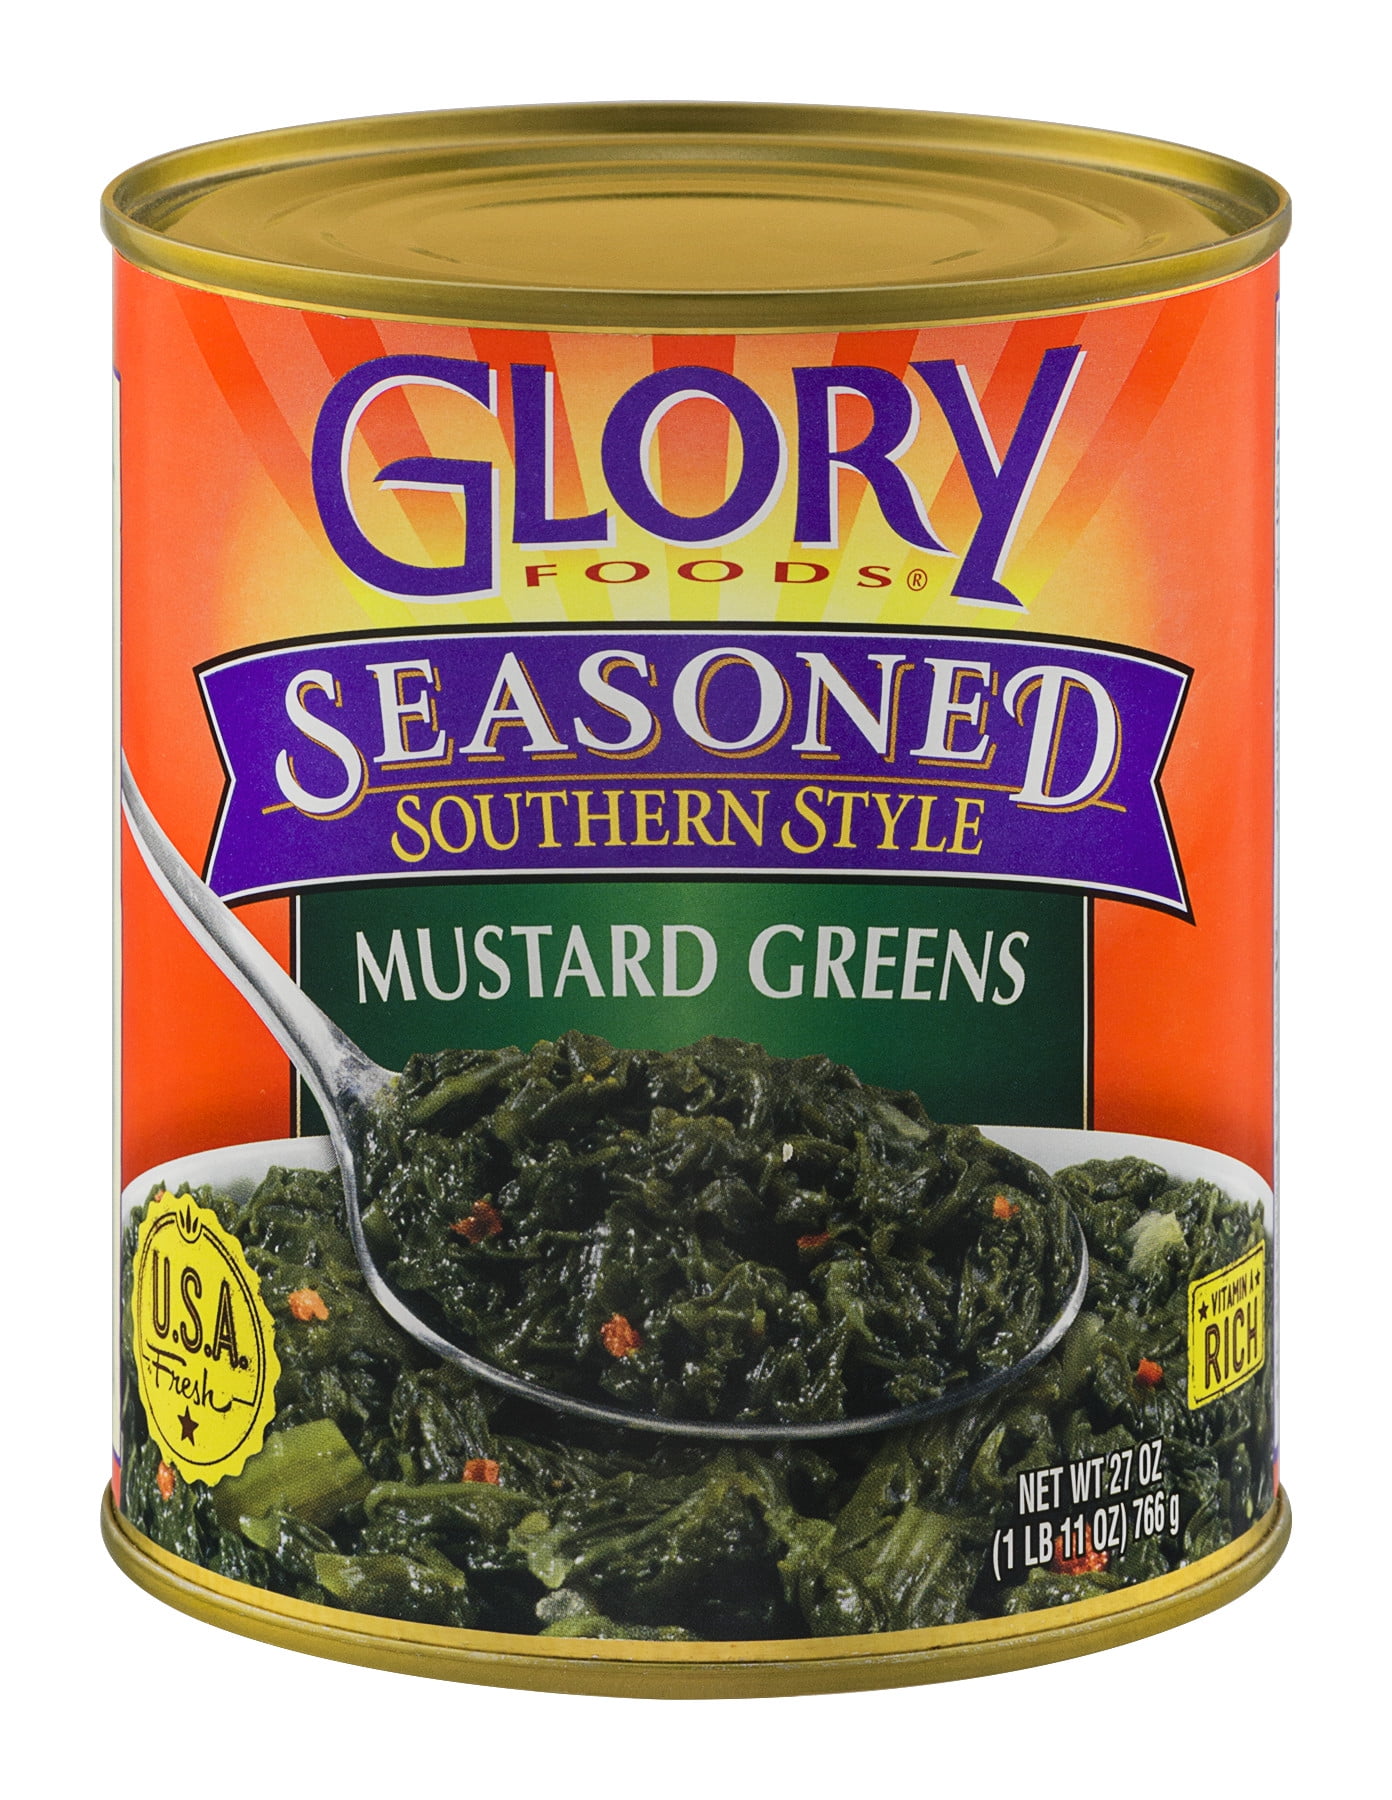 Glory Foods Seasoned Southern Style Mustard Greens, 27 oz., Can ...